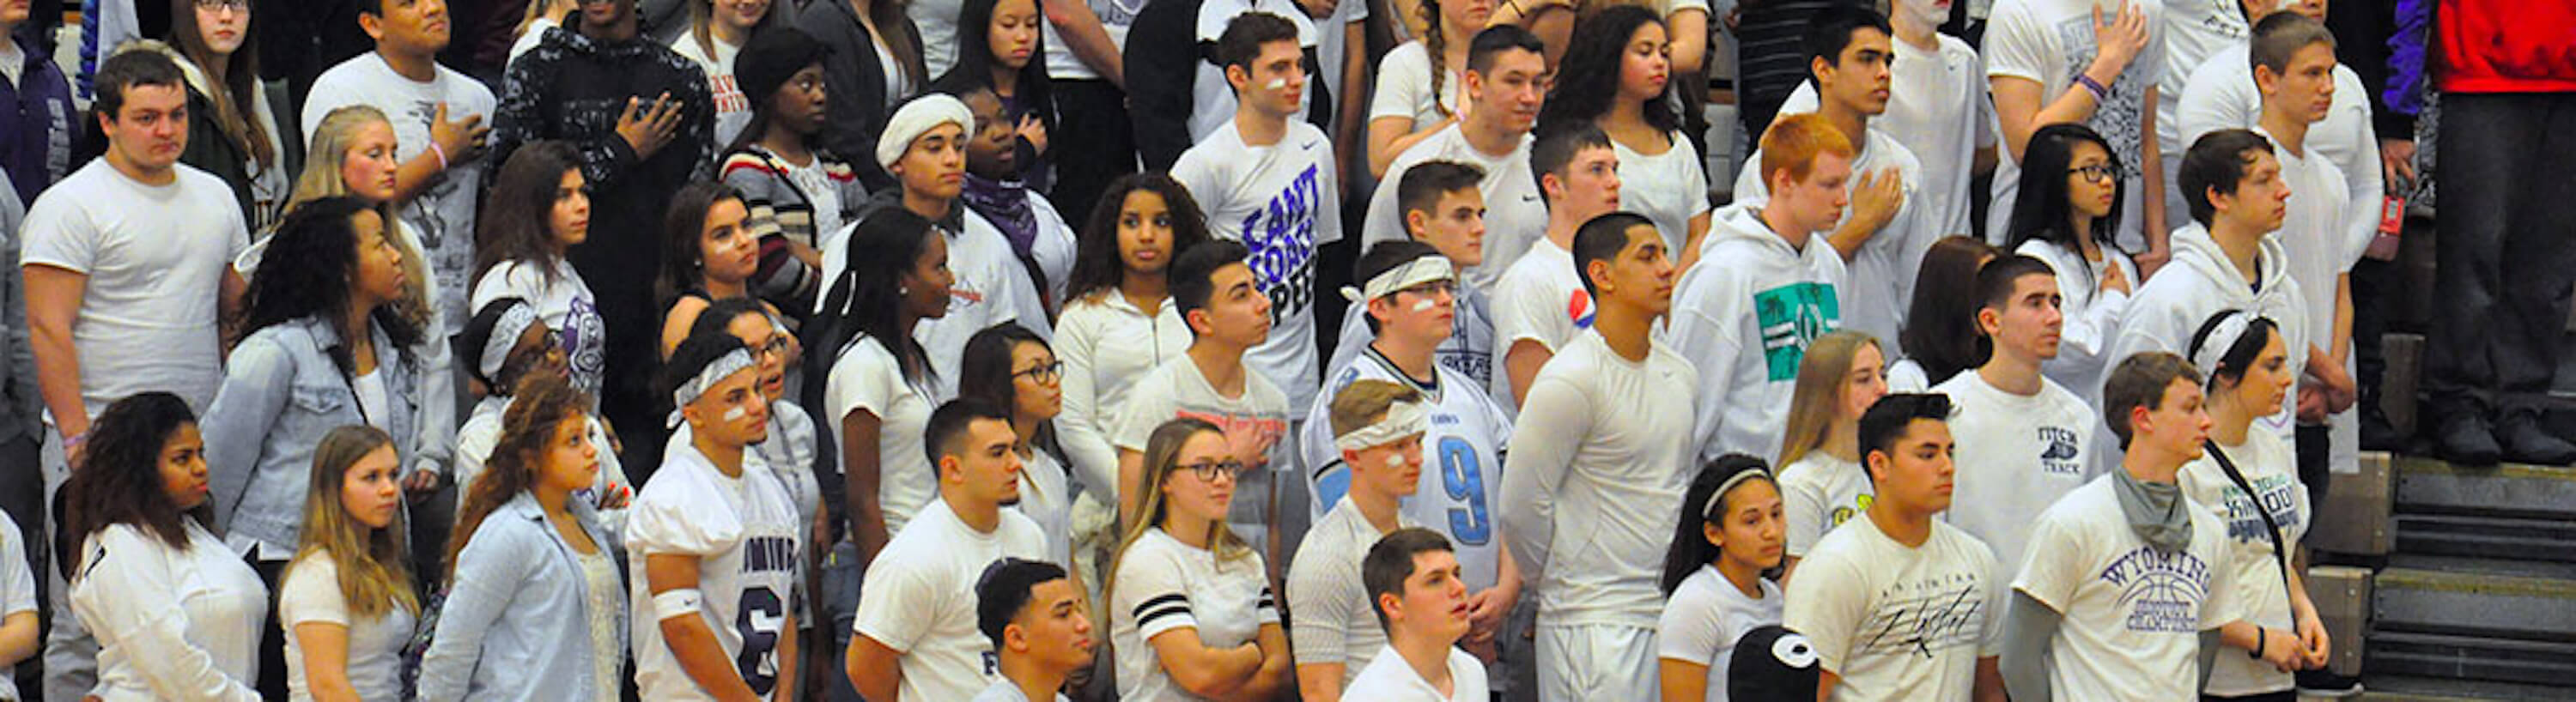 Photo of students listening to national anthem at basketball game